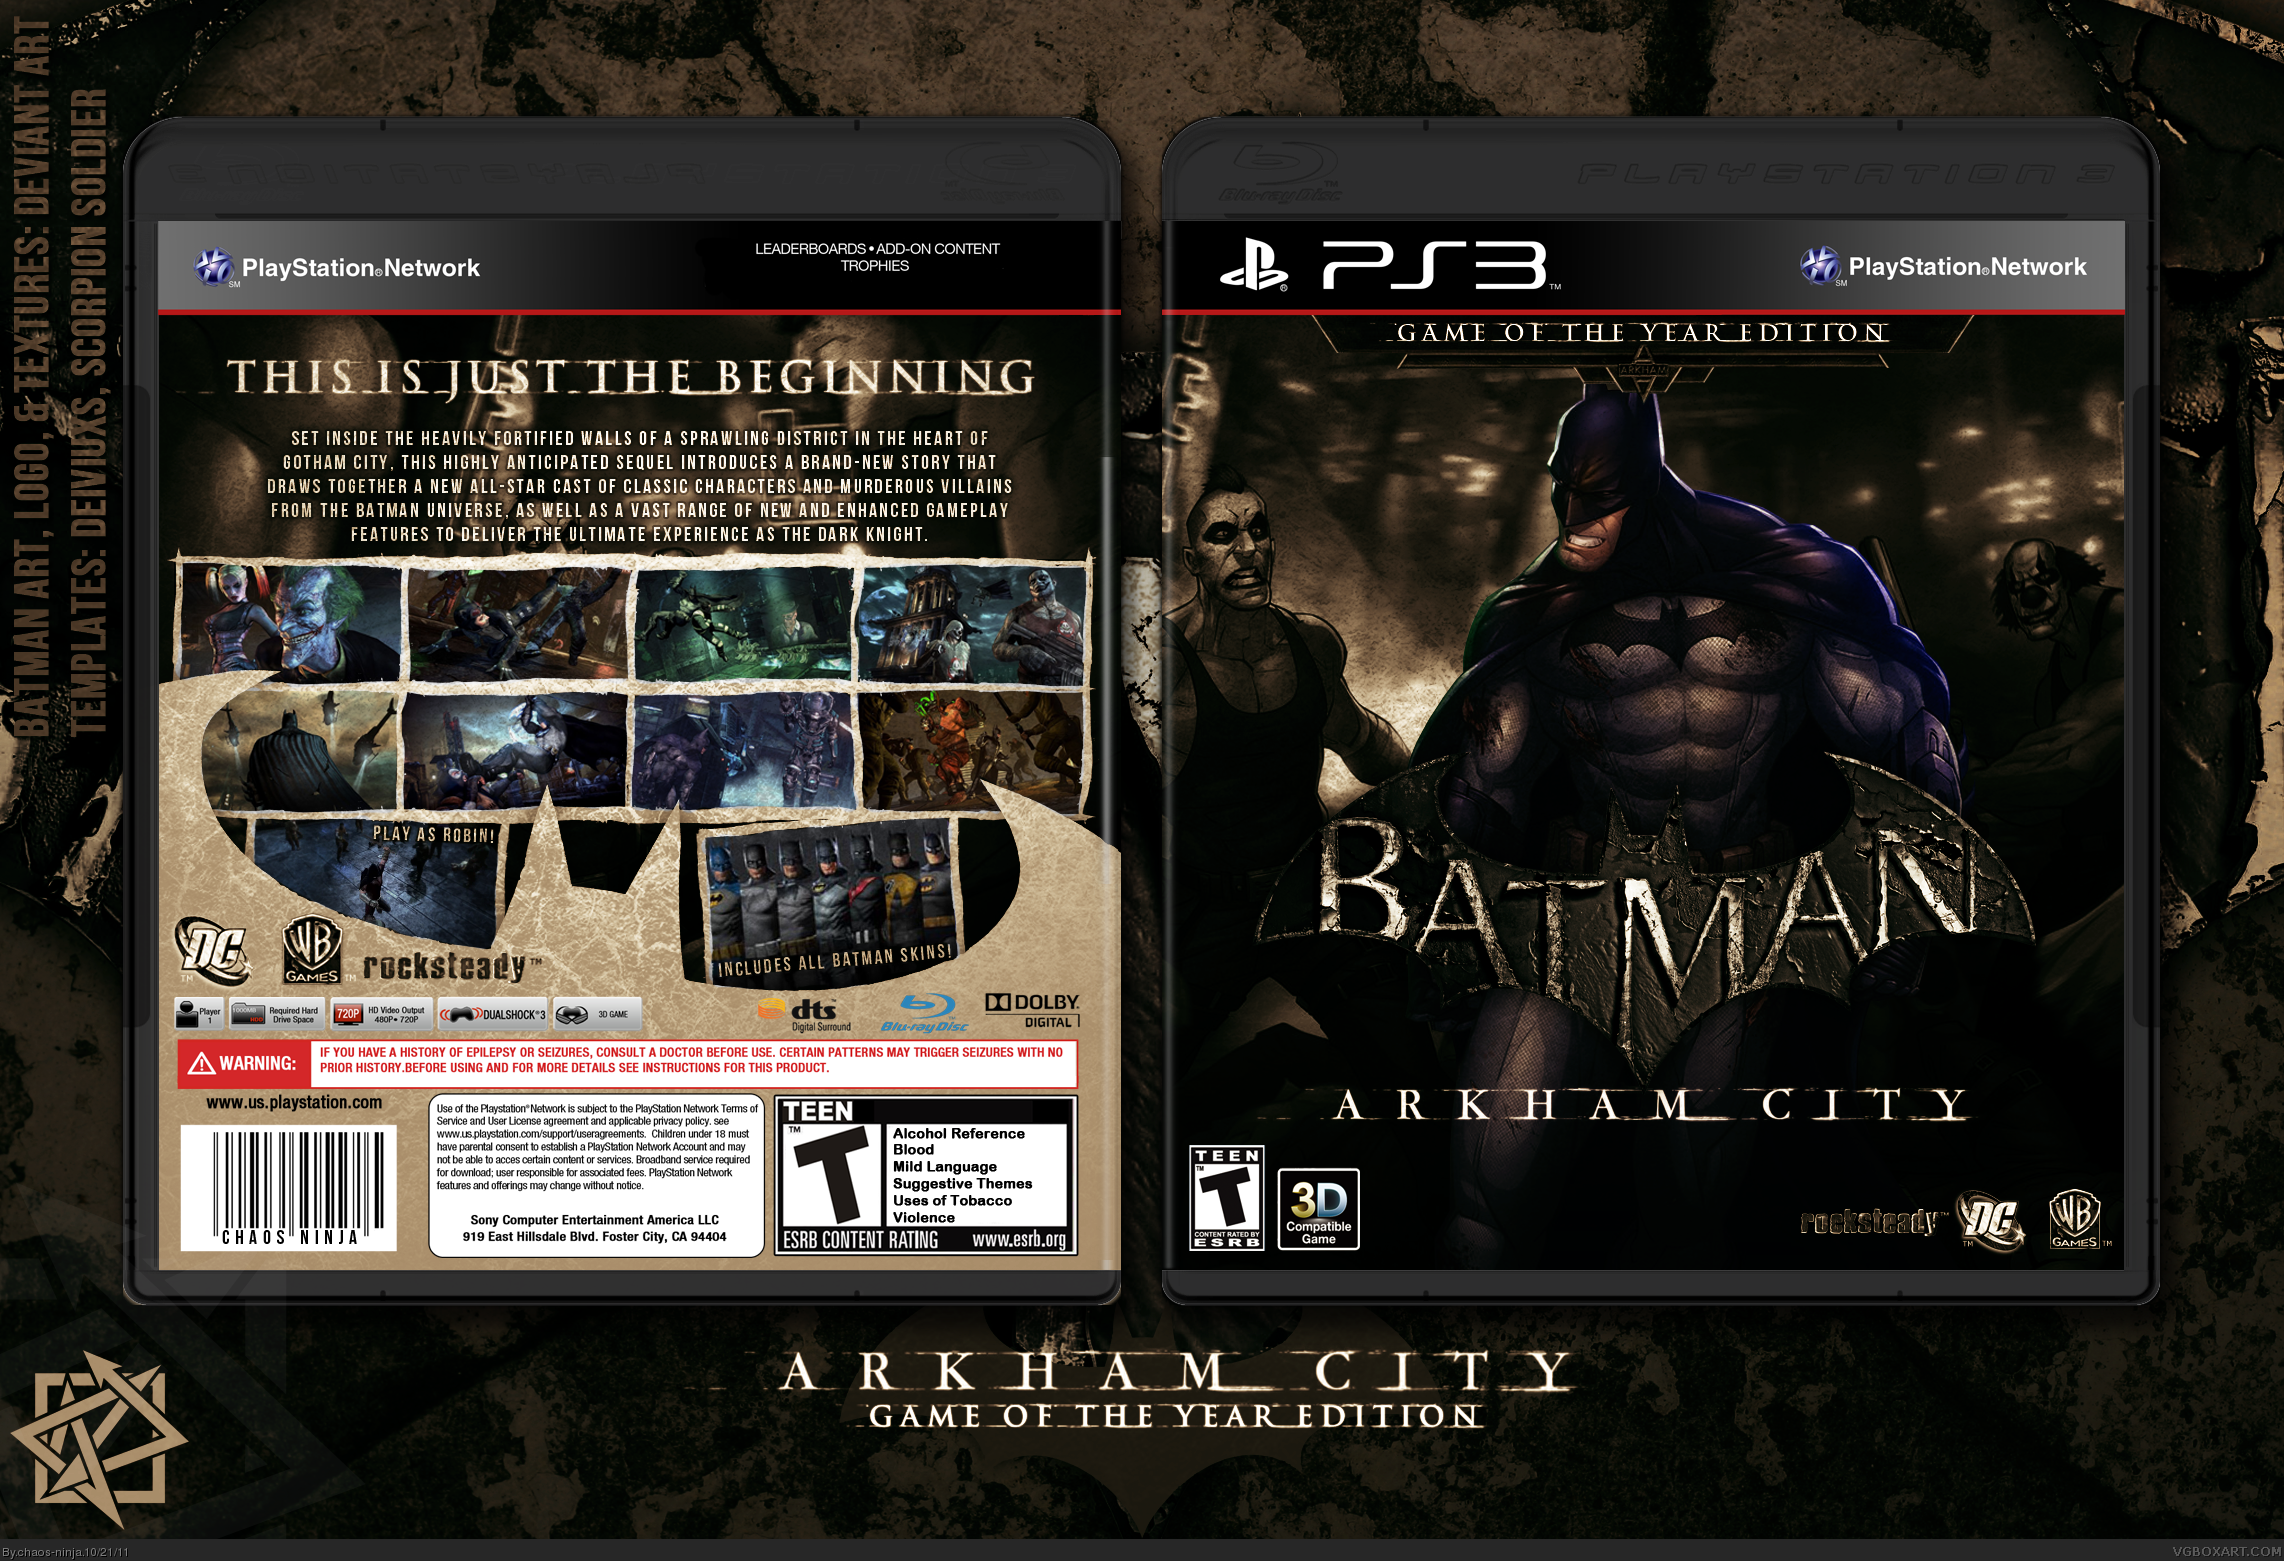 Batman Arkham City: Game of the Year Edition box cover